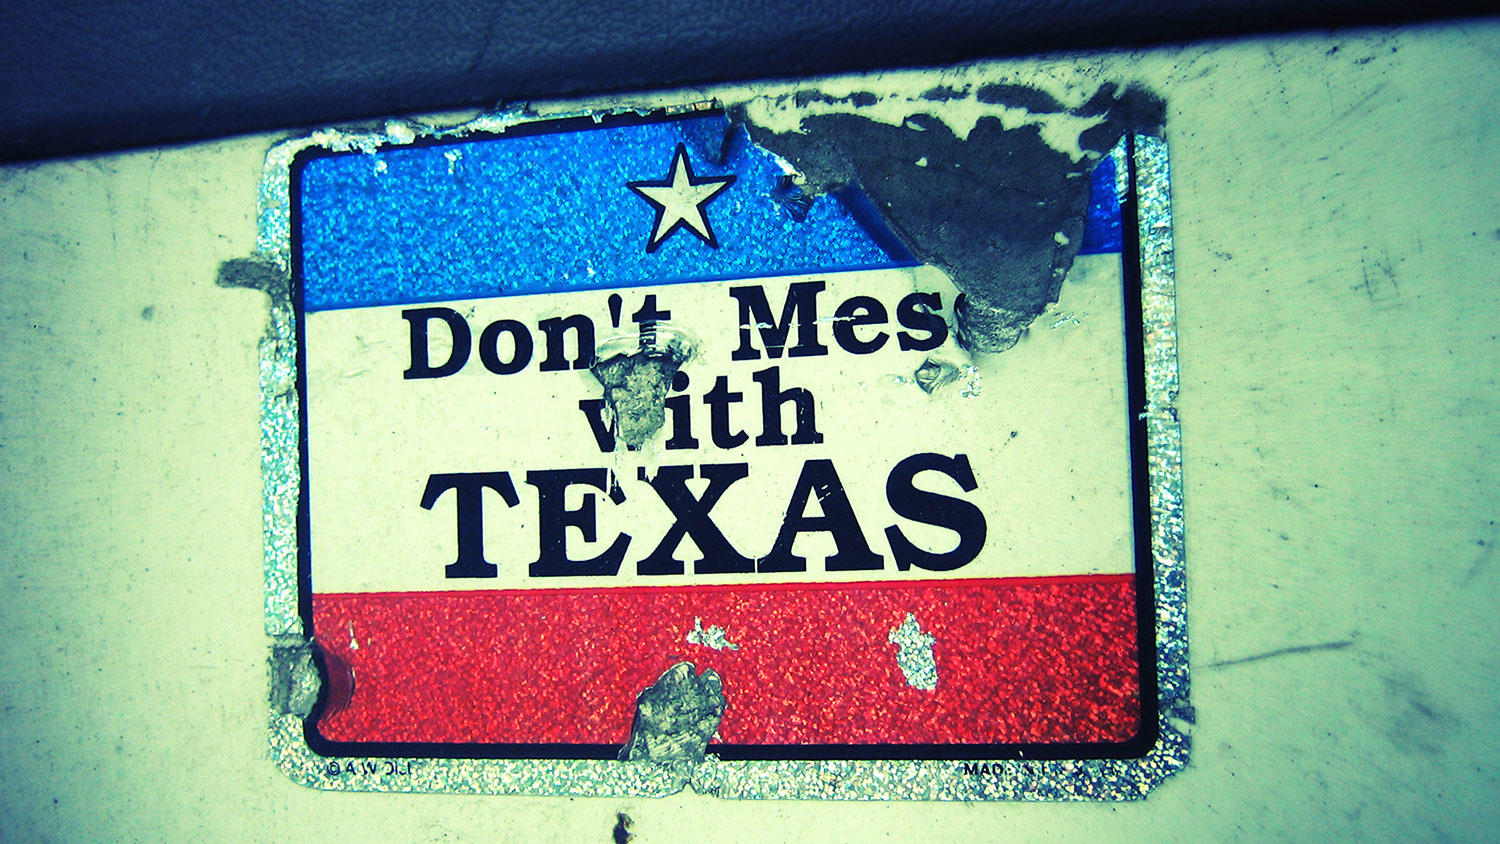 Don't mess with Texas